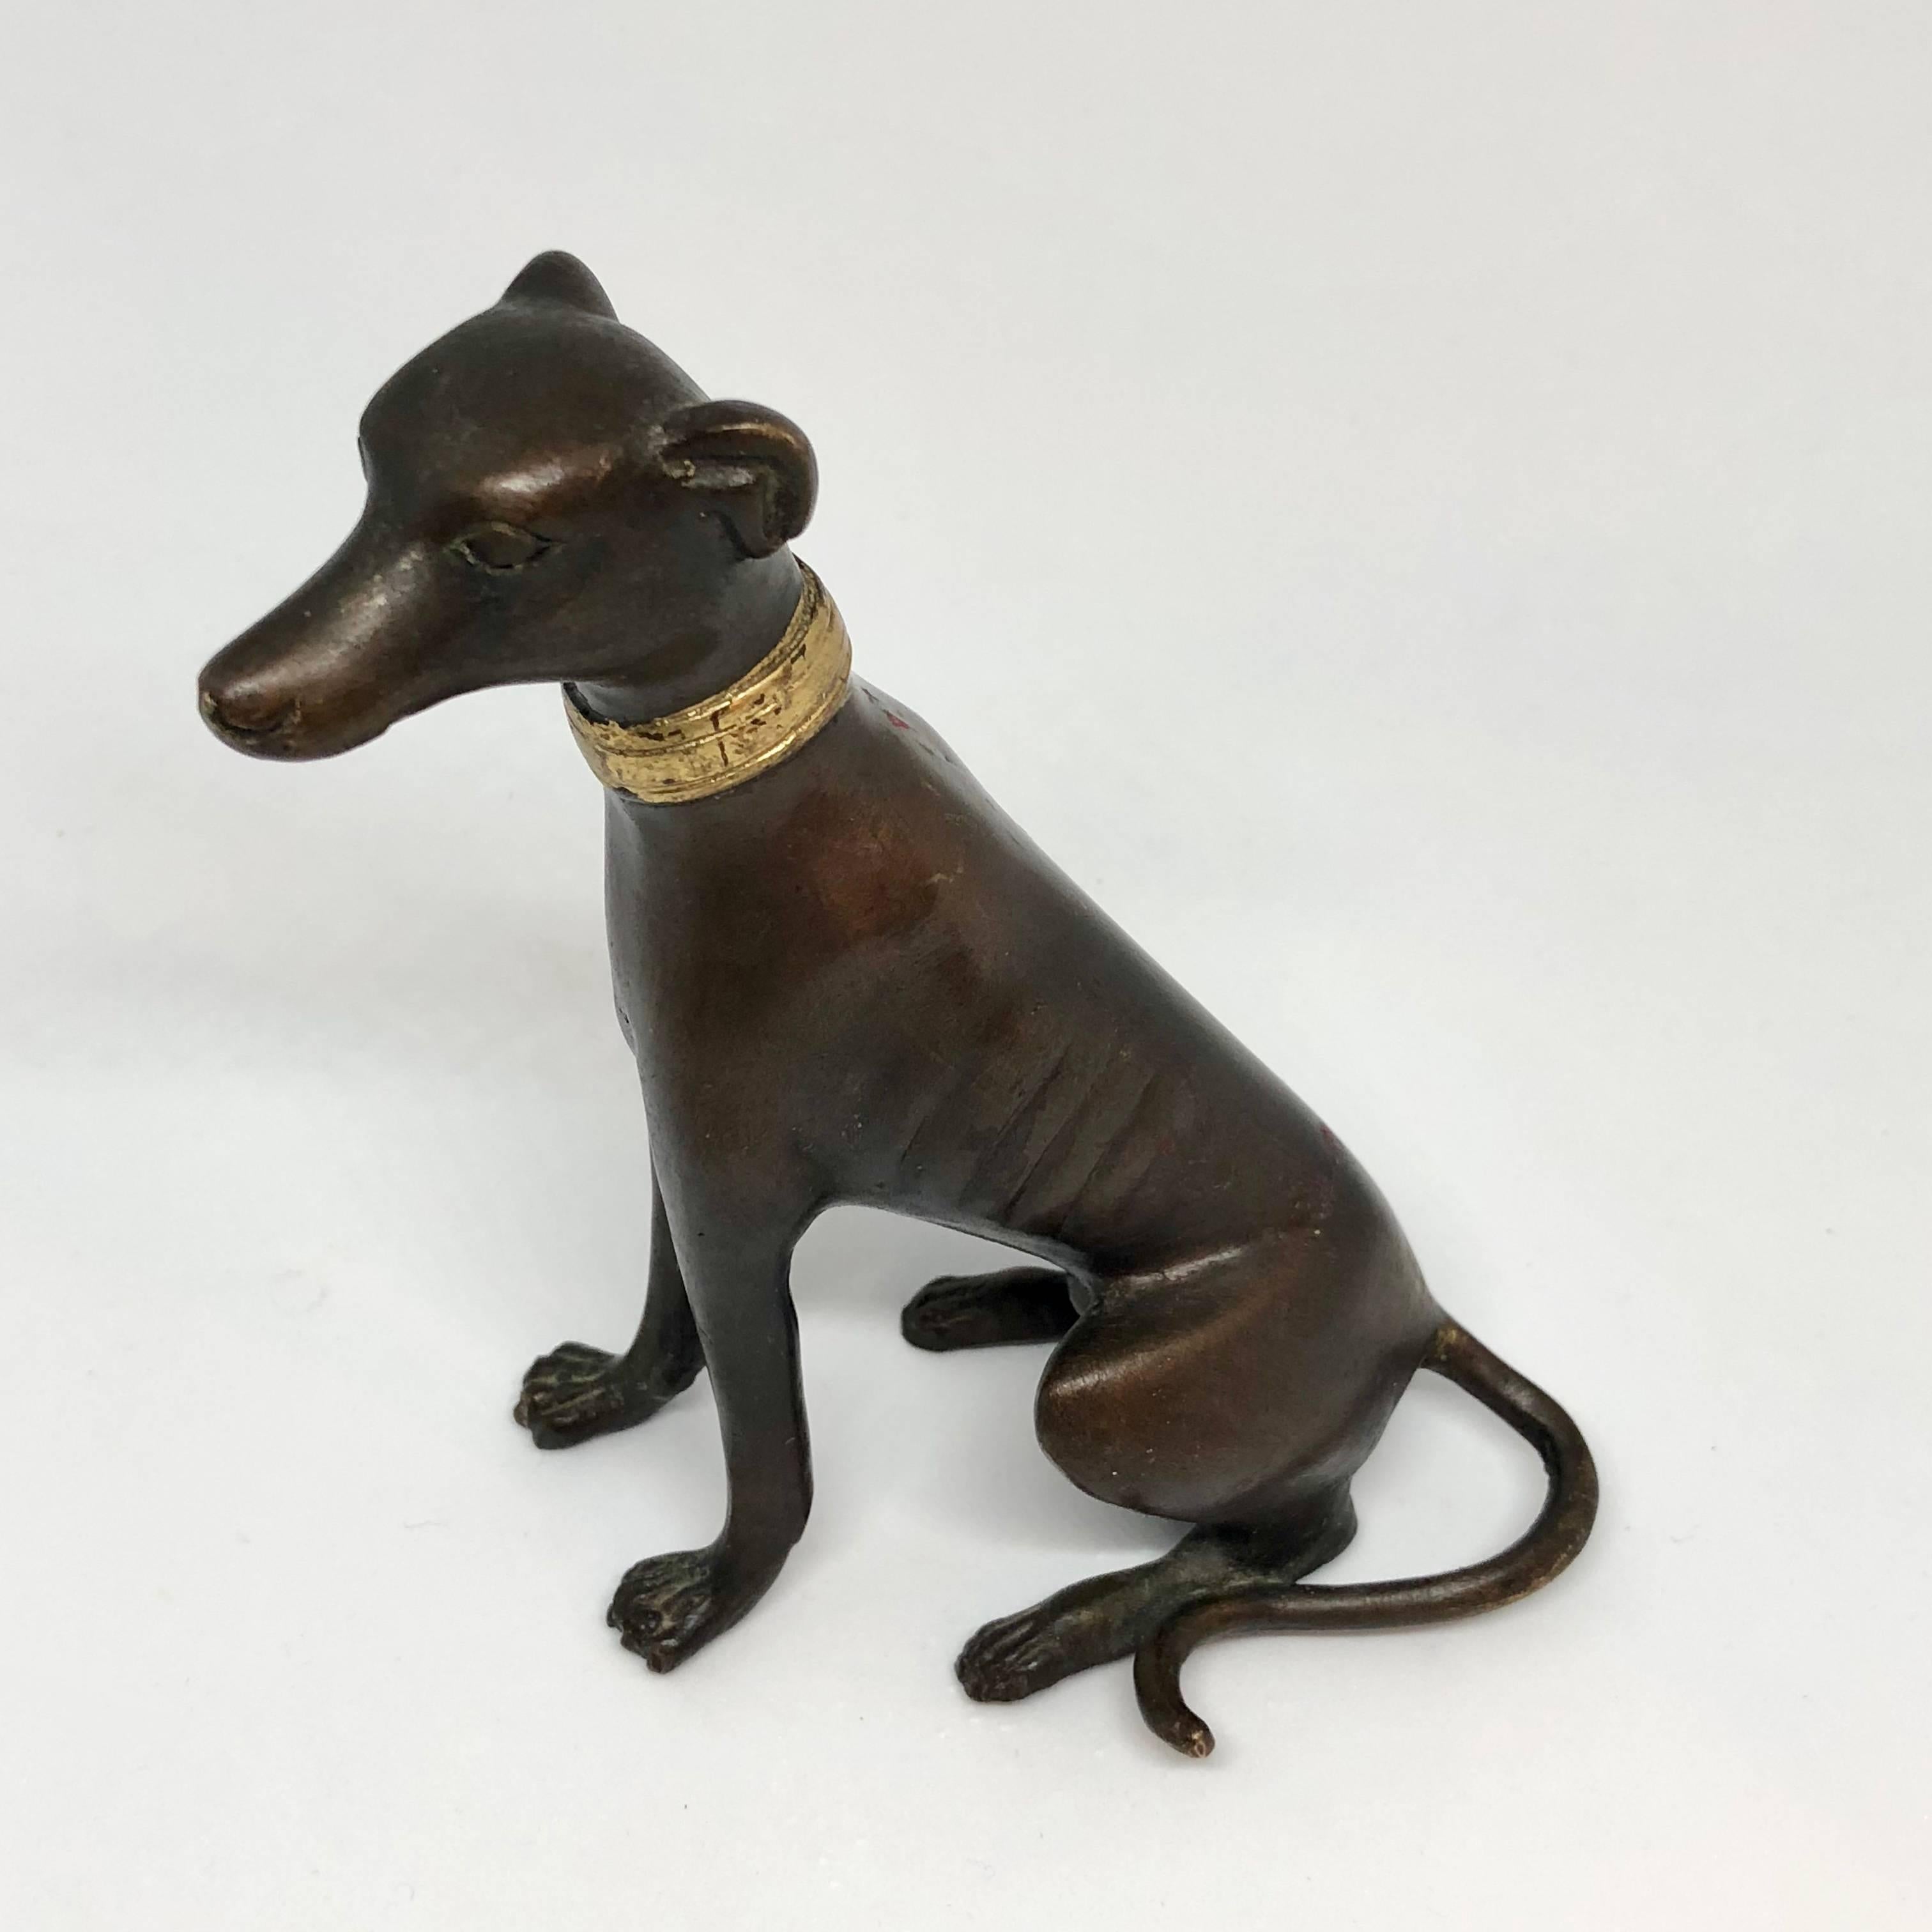 Bronze figure of sitting Greyhound with gilded collar

Patinated bronze sculpture of sitting greyhound with polished bronze collar.